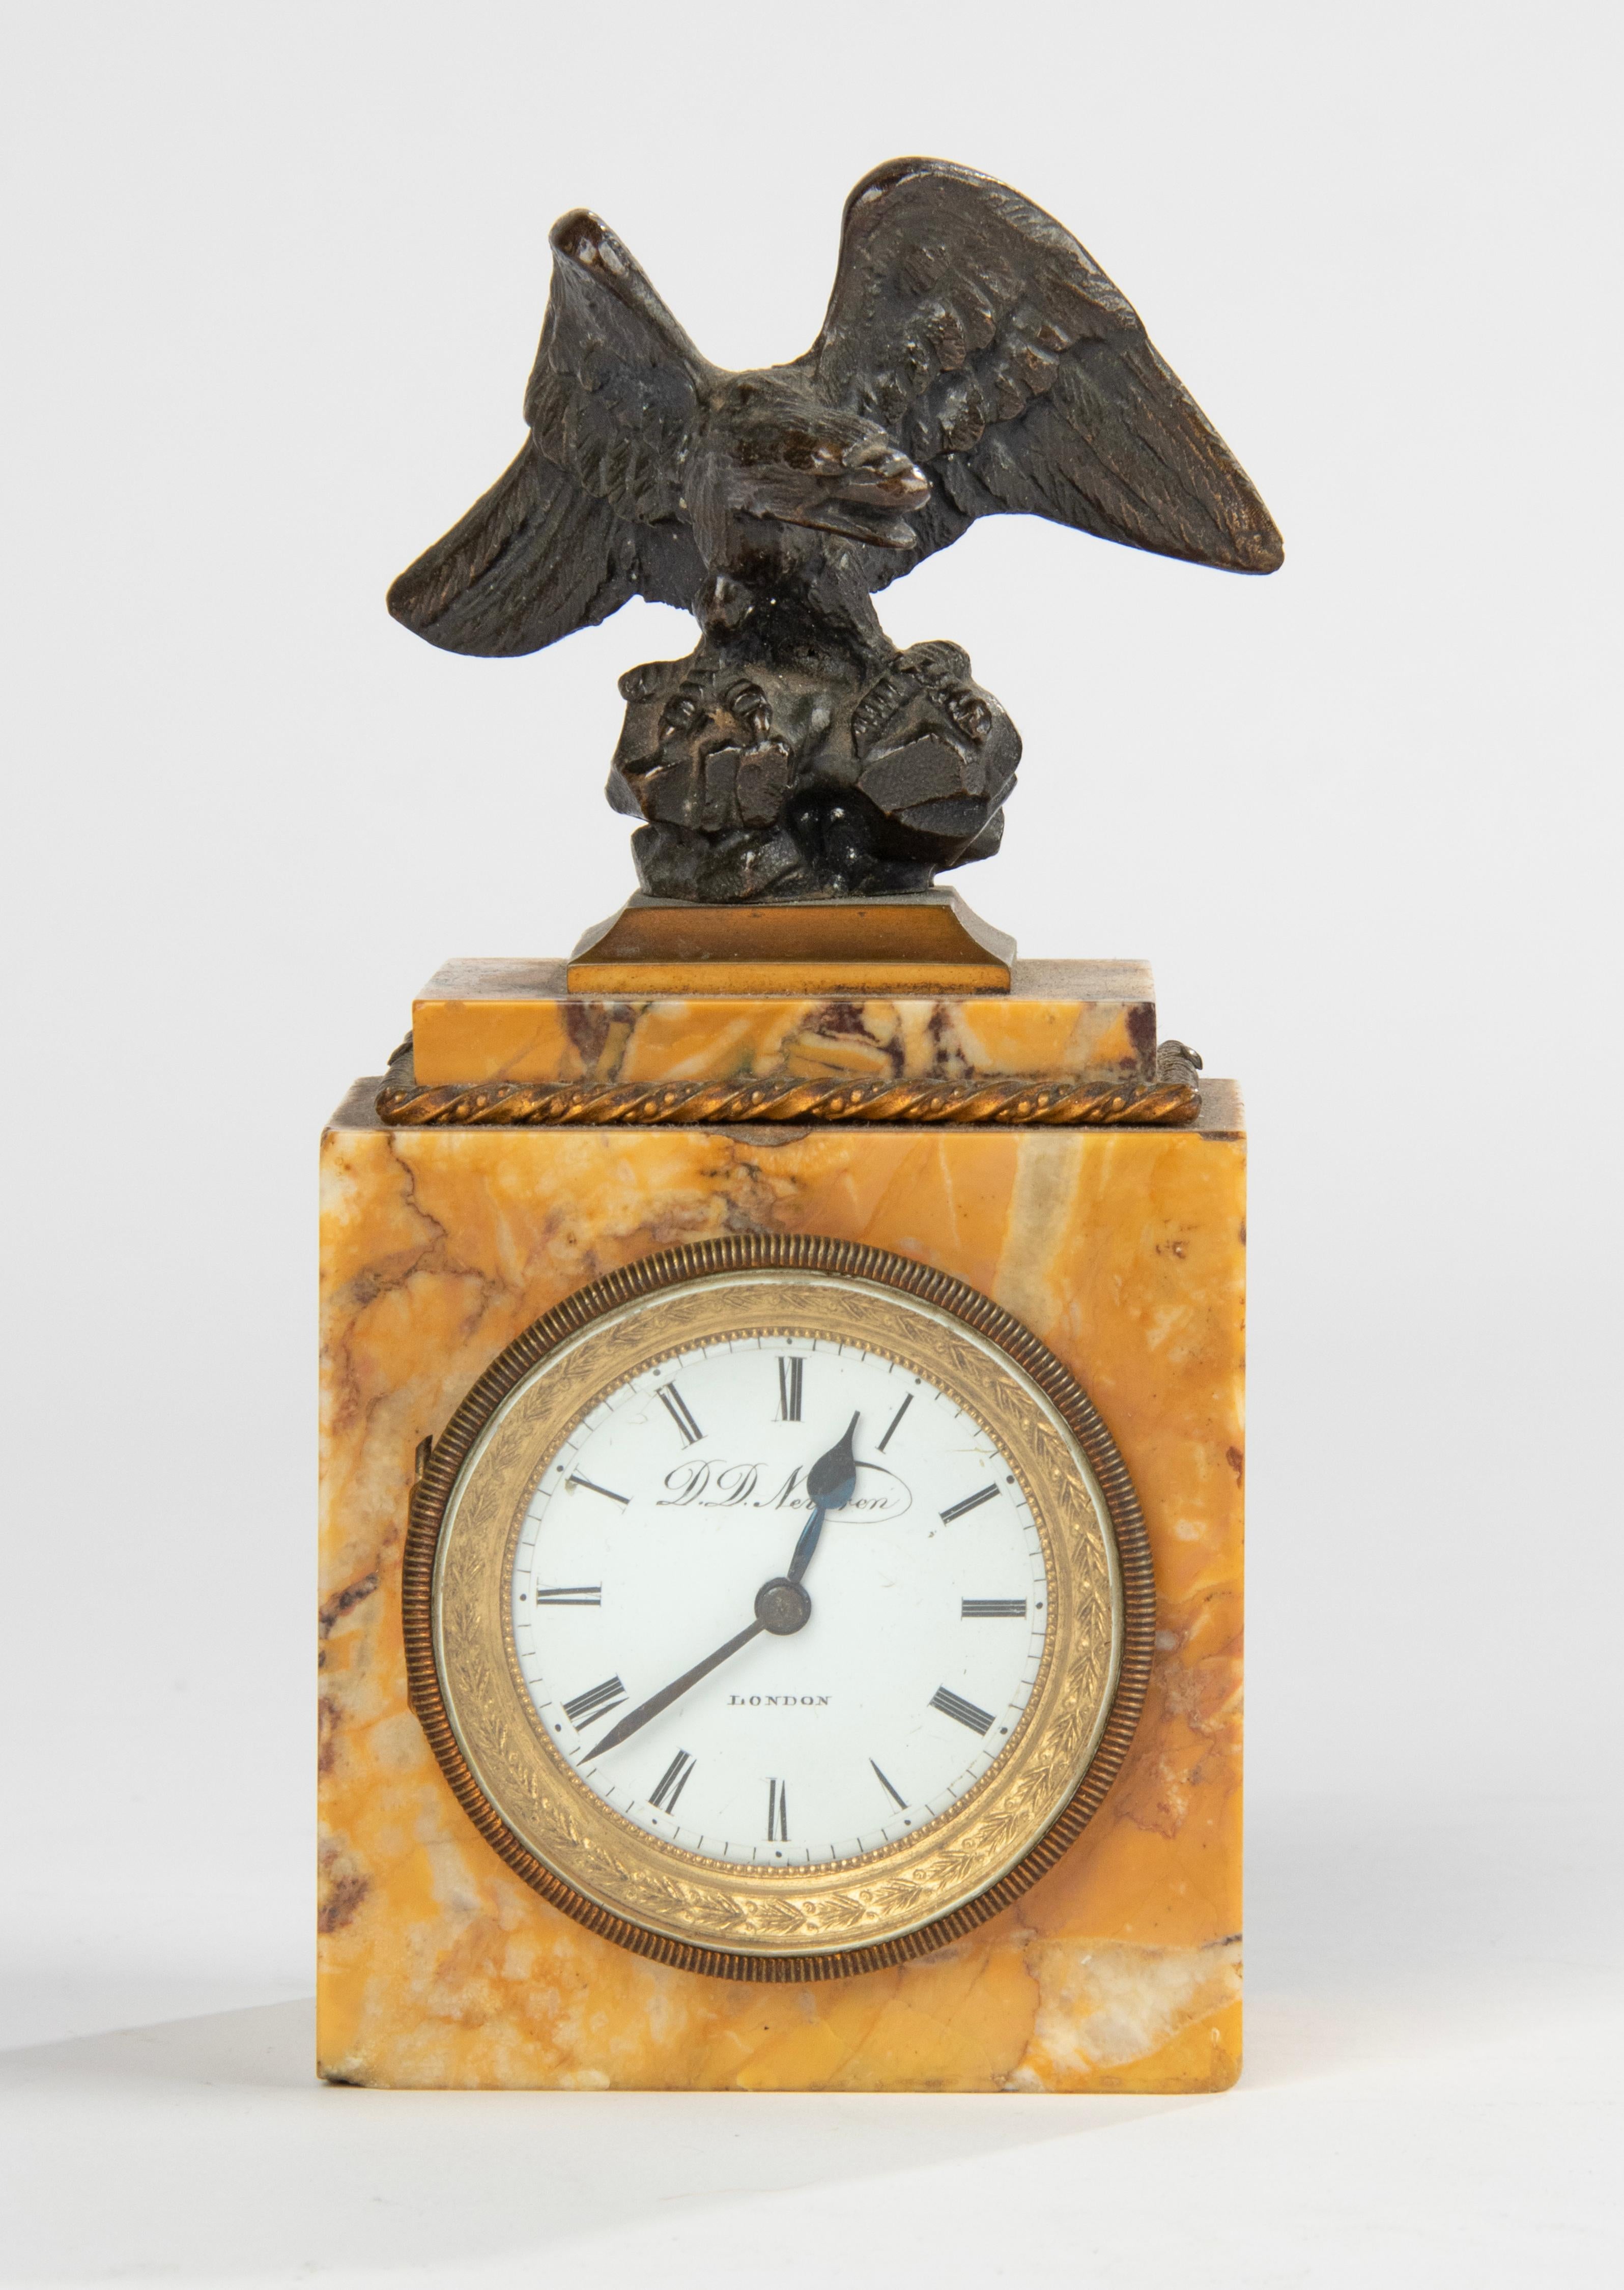 A small and elegant desk clock from the Empire period. The case is made of Siena marble, on top of a patinated bronze eagle, enameled hand-painted dial. The clockwork is made by from D.D. Neveren, a London watchmaker. The clock runs through an